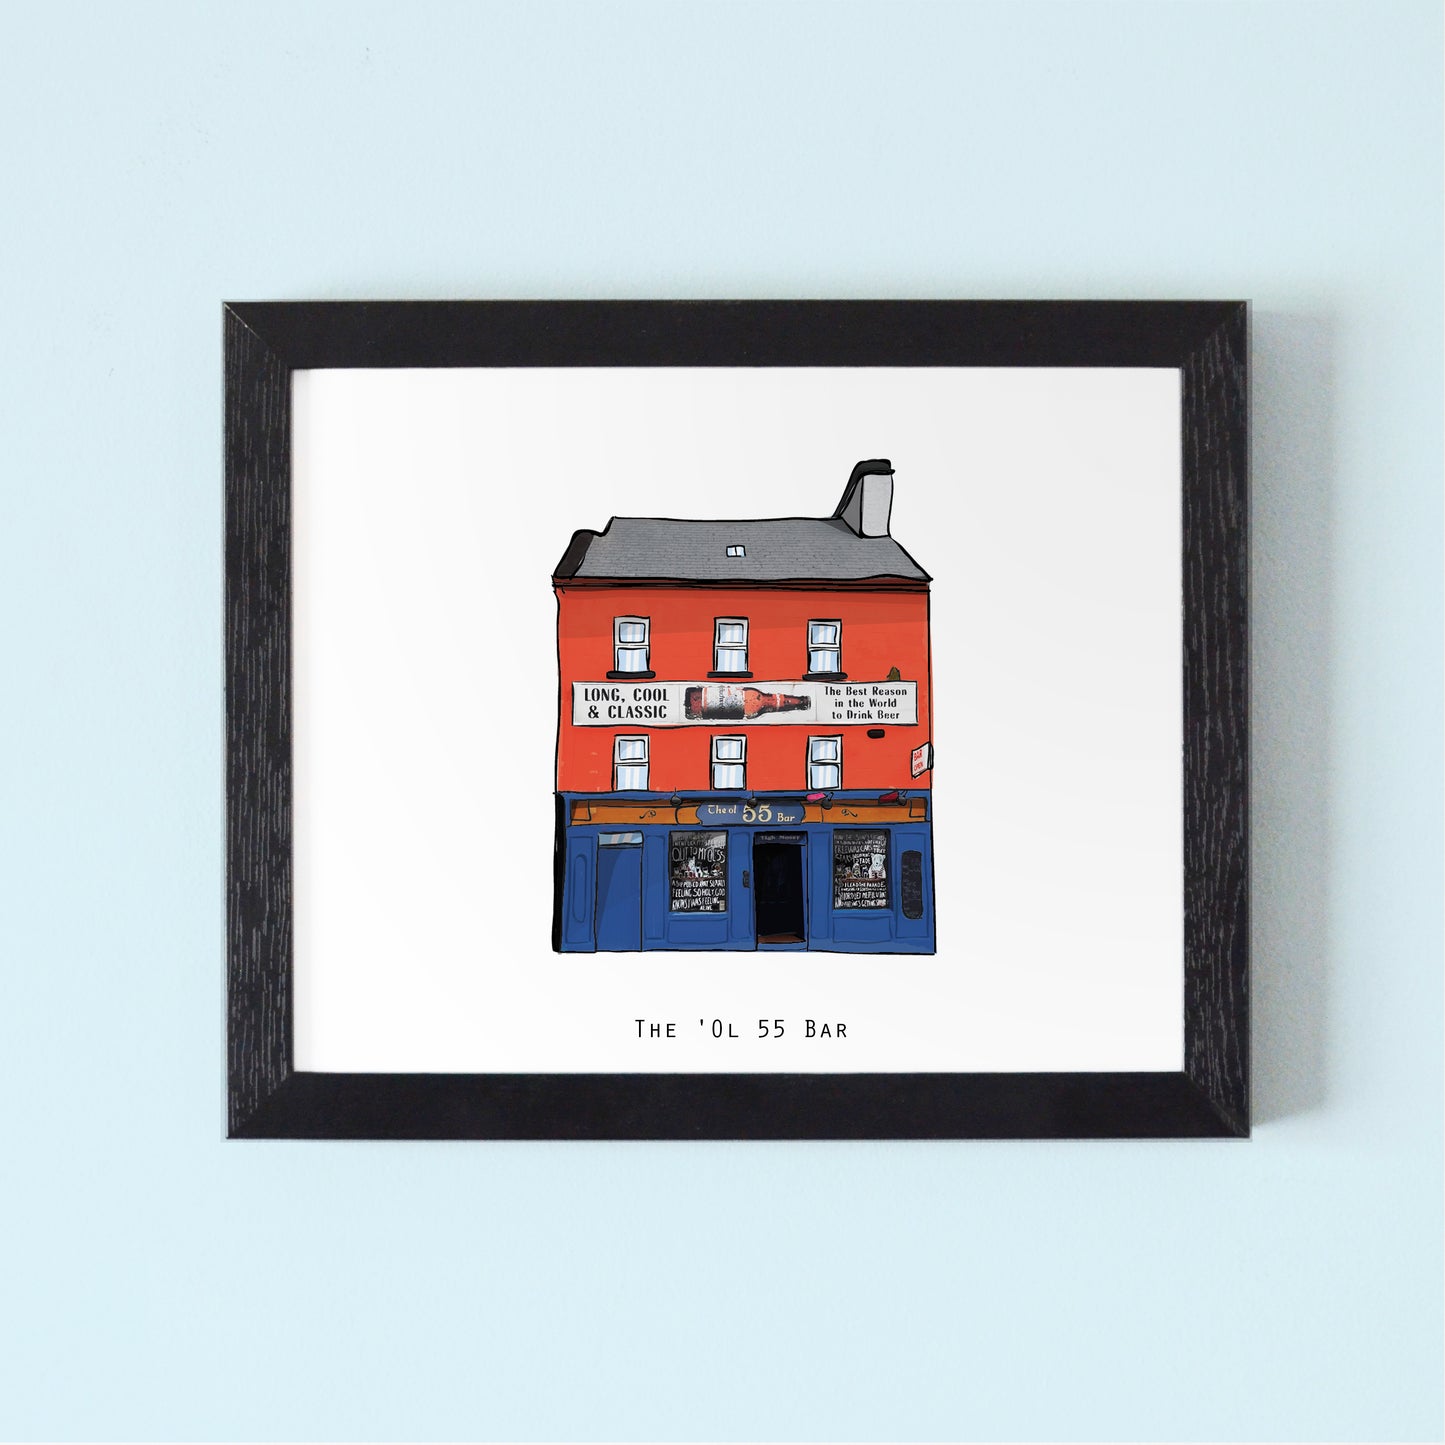 The 'Ol 55 Bar Illustrated Pubs of Galway